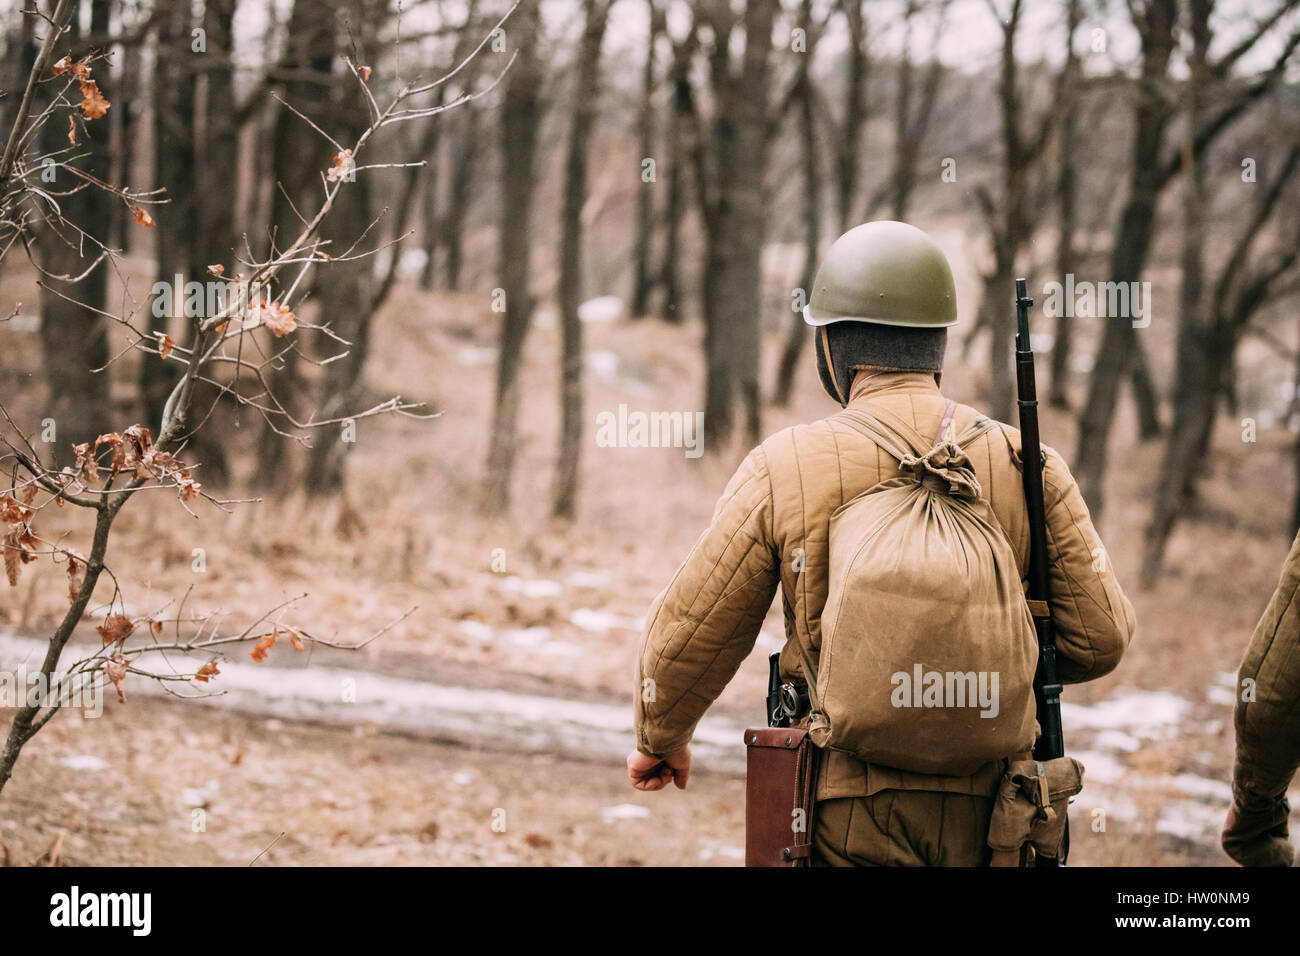 Re-enactor Dressed As Soviet Russian Red Army Infantry Soldier Of World War II Marching Along Forest Road At Autumn Season Stock Photo